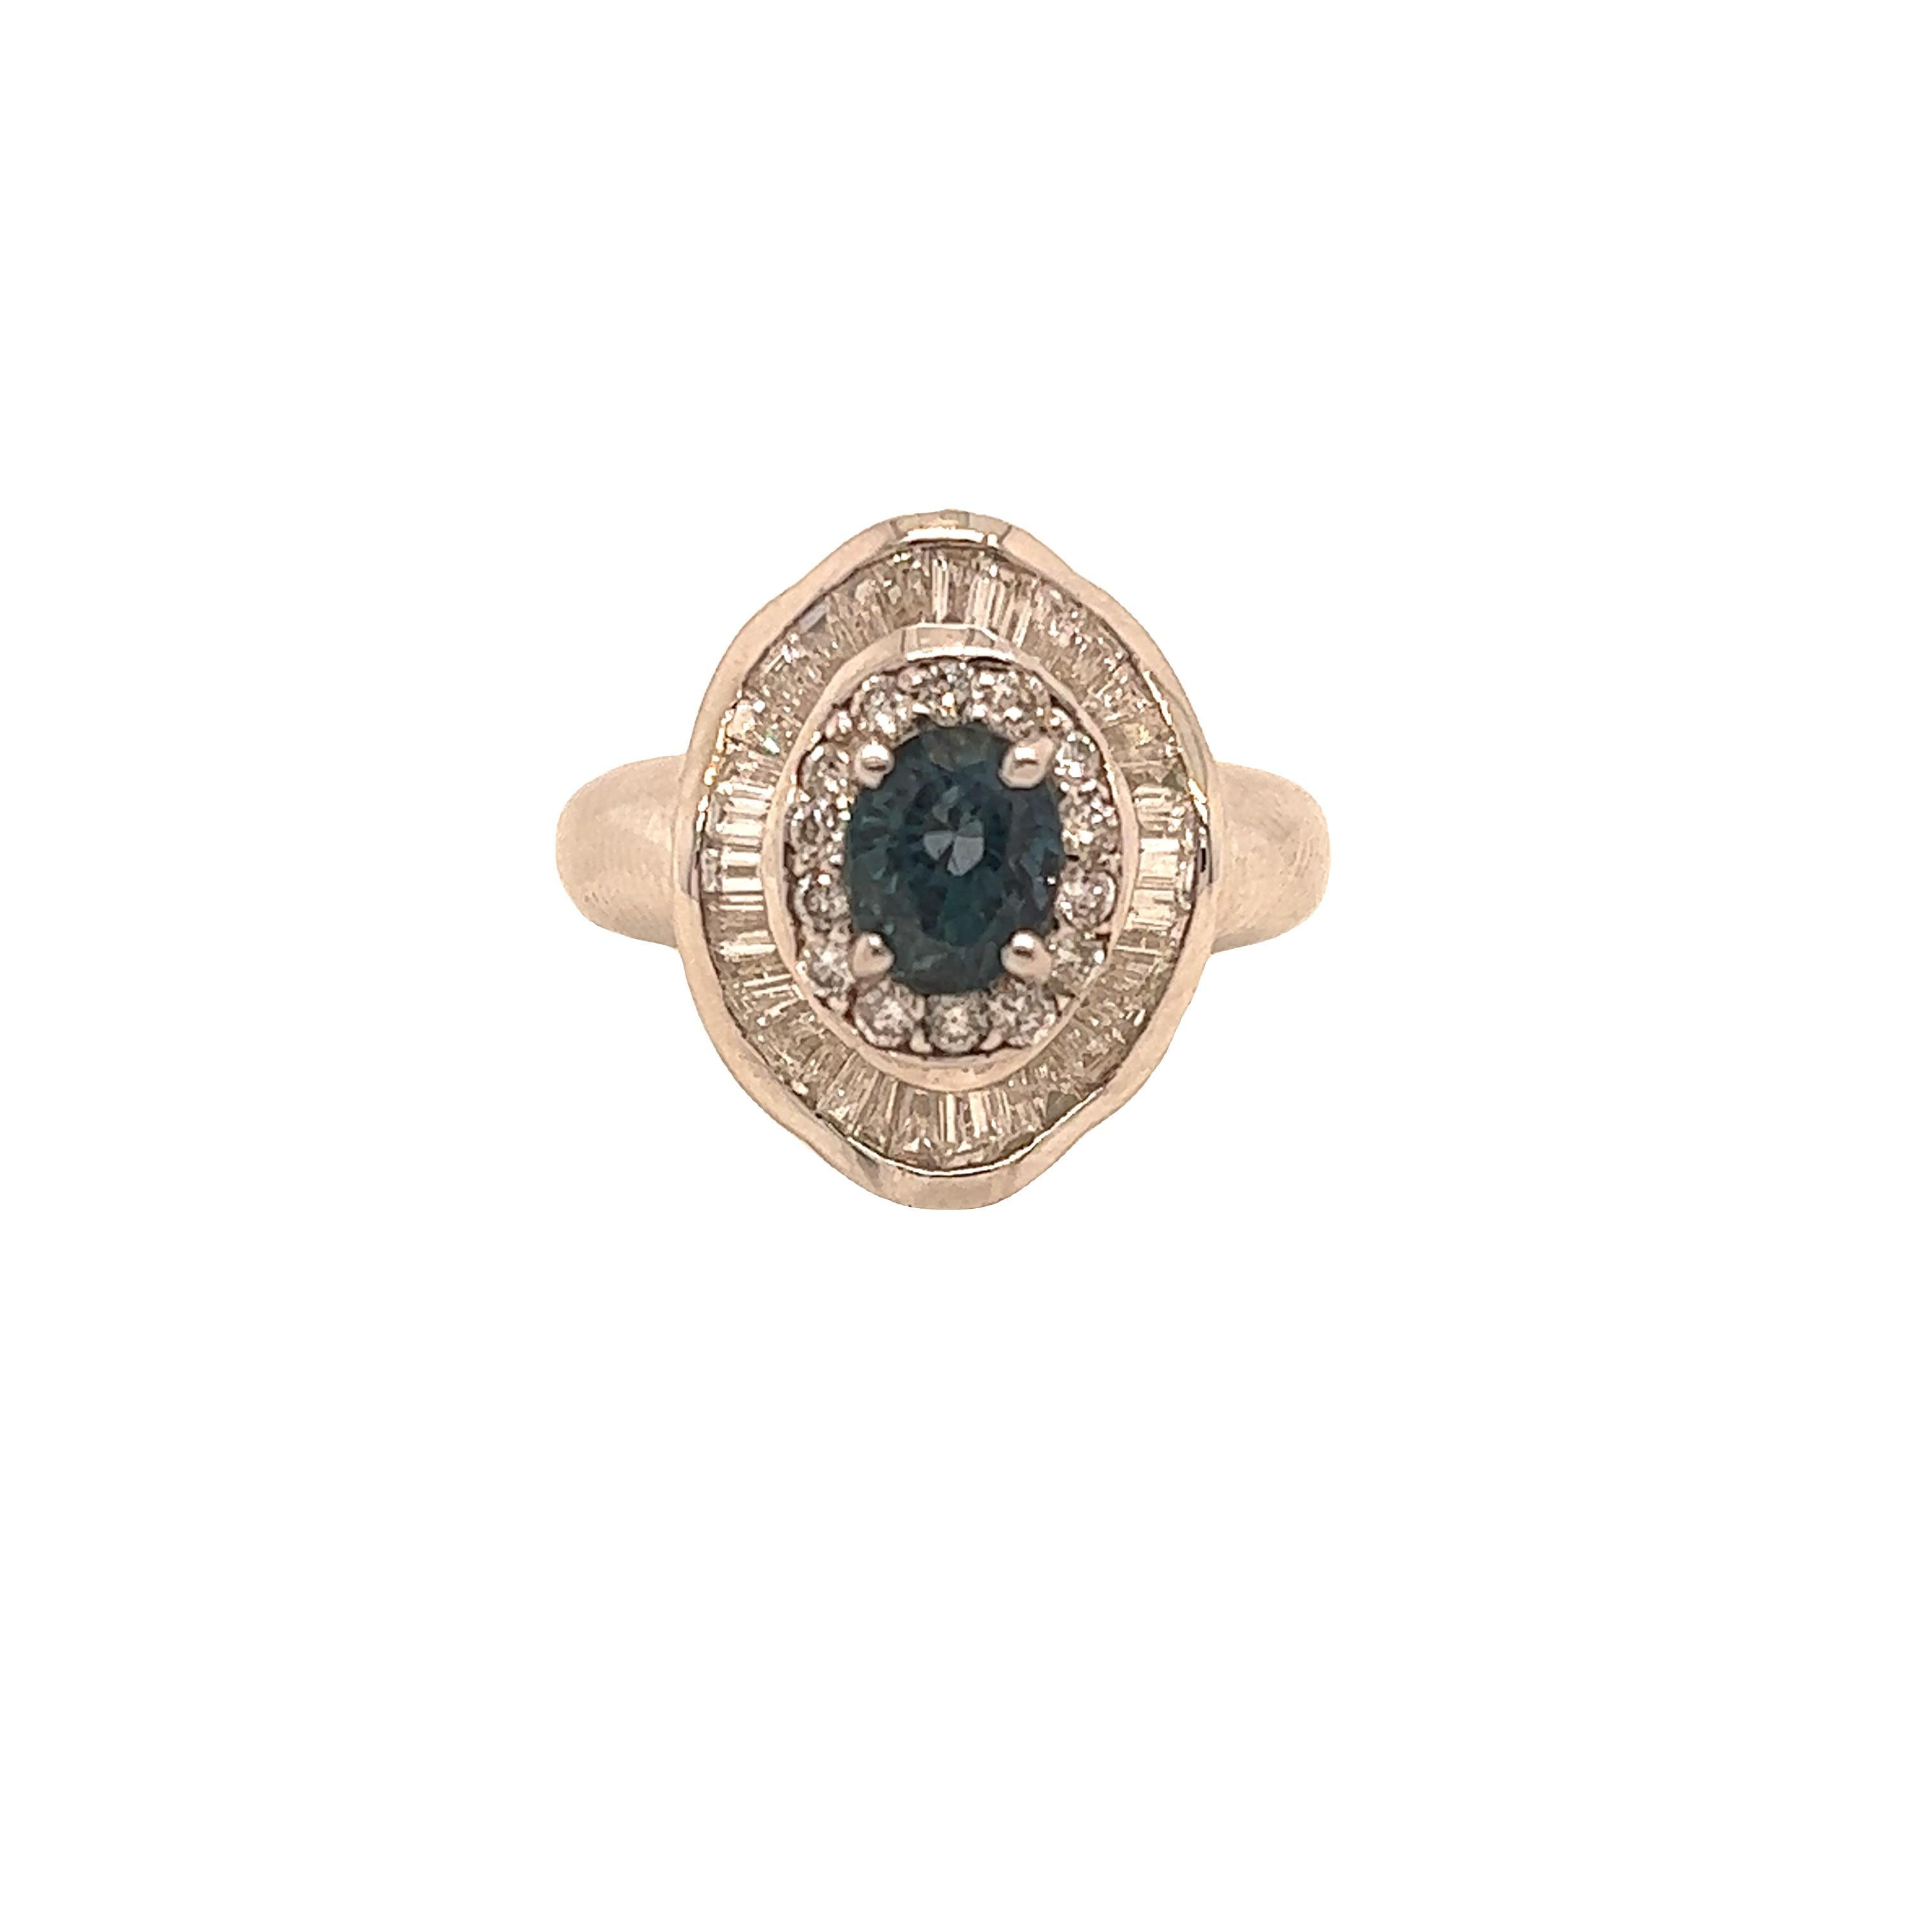 This is a gorgeous natural AAA quality oval  Alexandrite surrounded by dainty diamonds that is set in a vintage white gold setting. This ring features a natural 1.16 carat oval alexandrite that is certified by the Gemological Institute of America